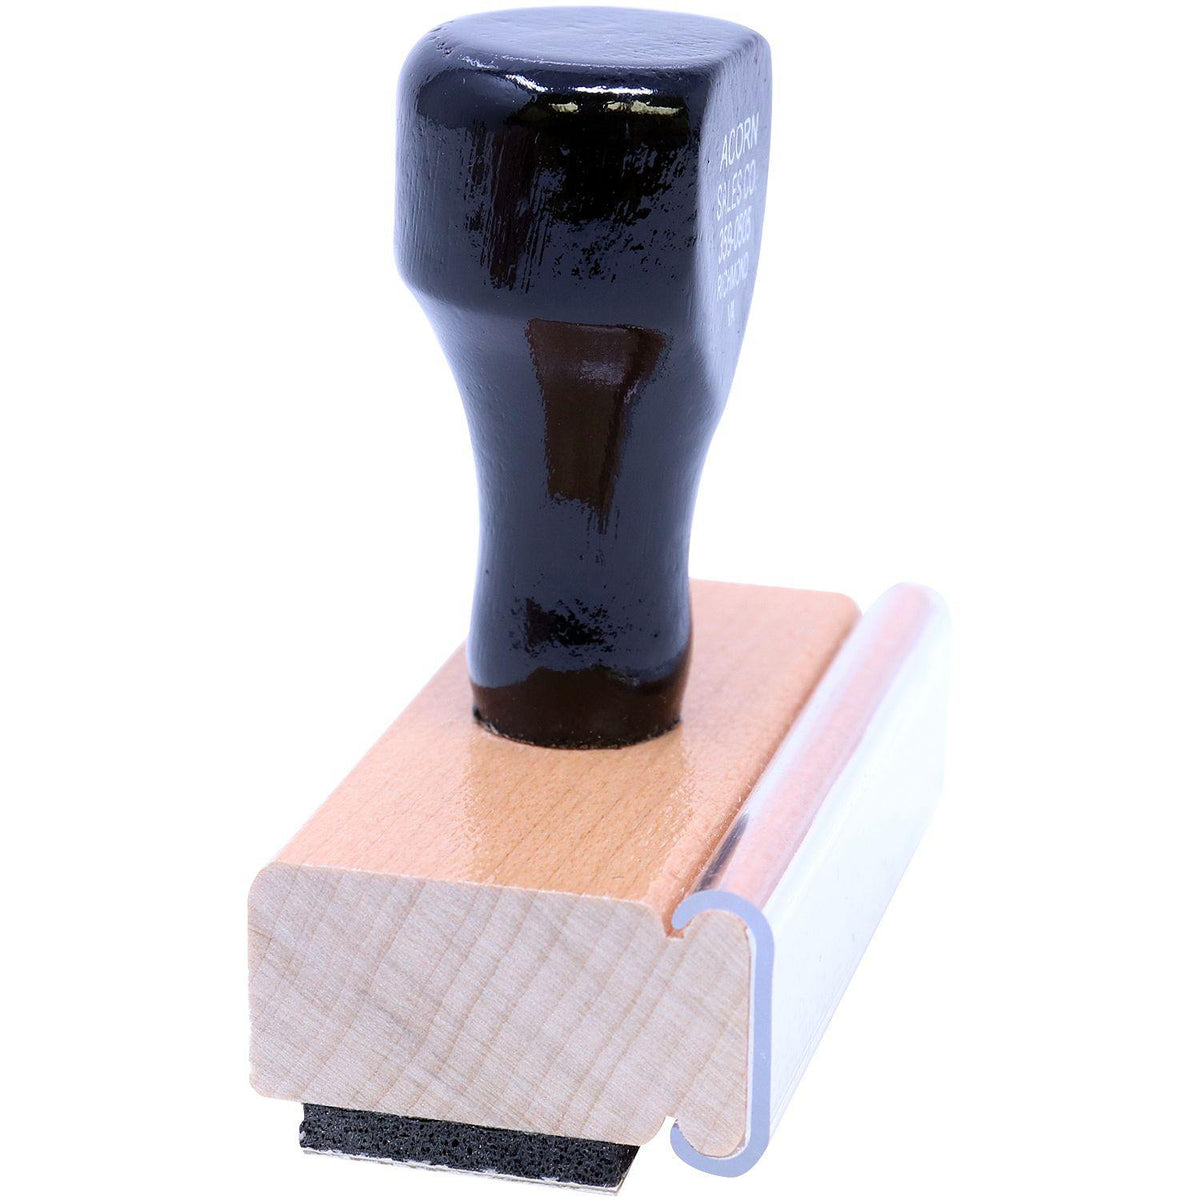 Side View of Large Library Mail Rubber Stamp at an Angle